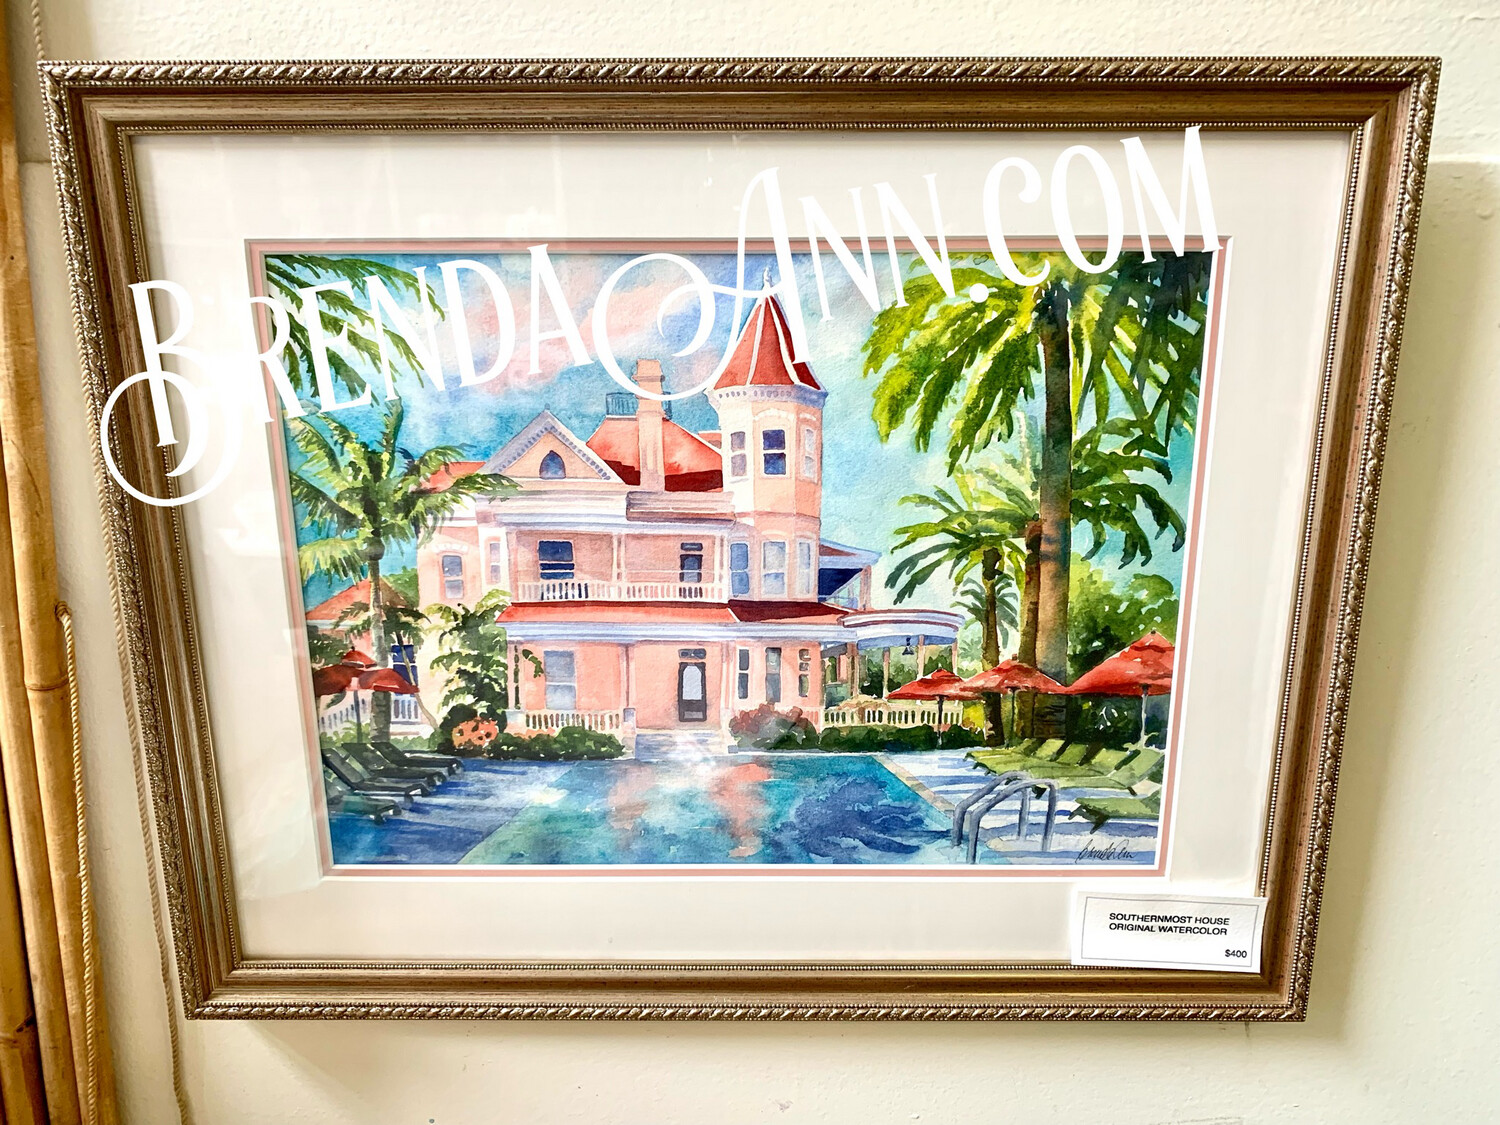 Key West Art - Southernmost House FRAMED ORIGINAL Watercolor Painting